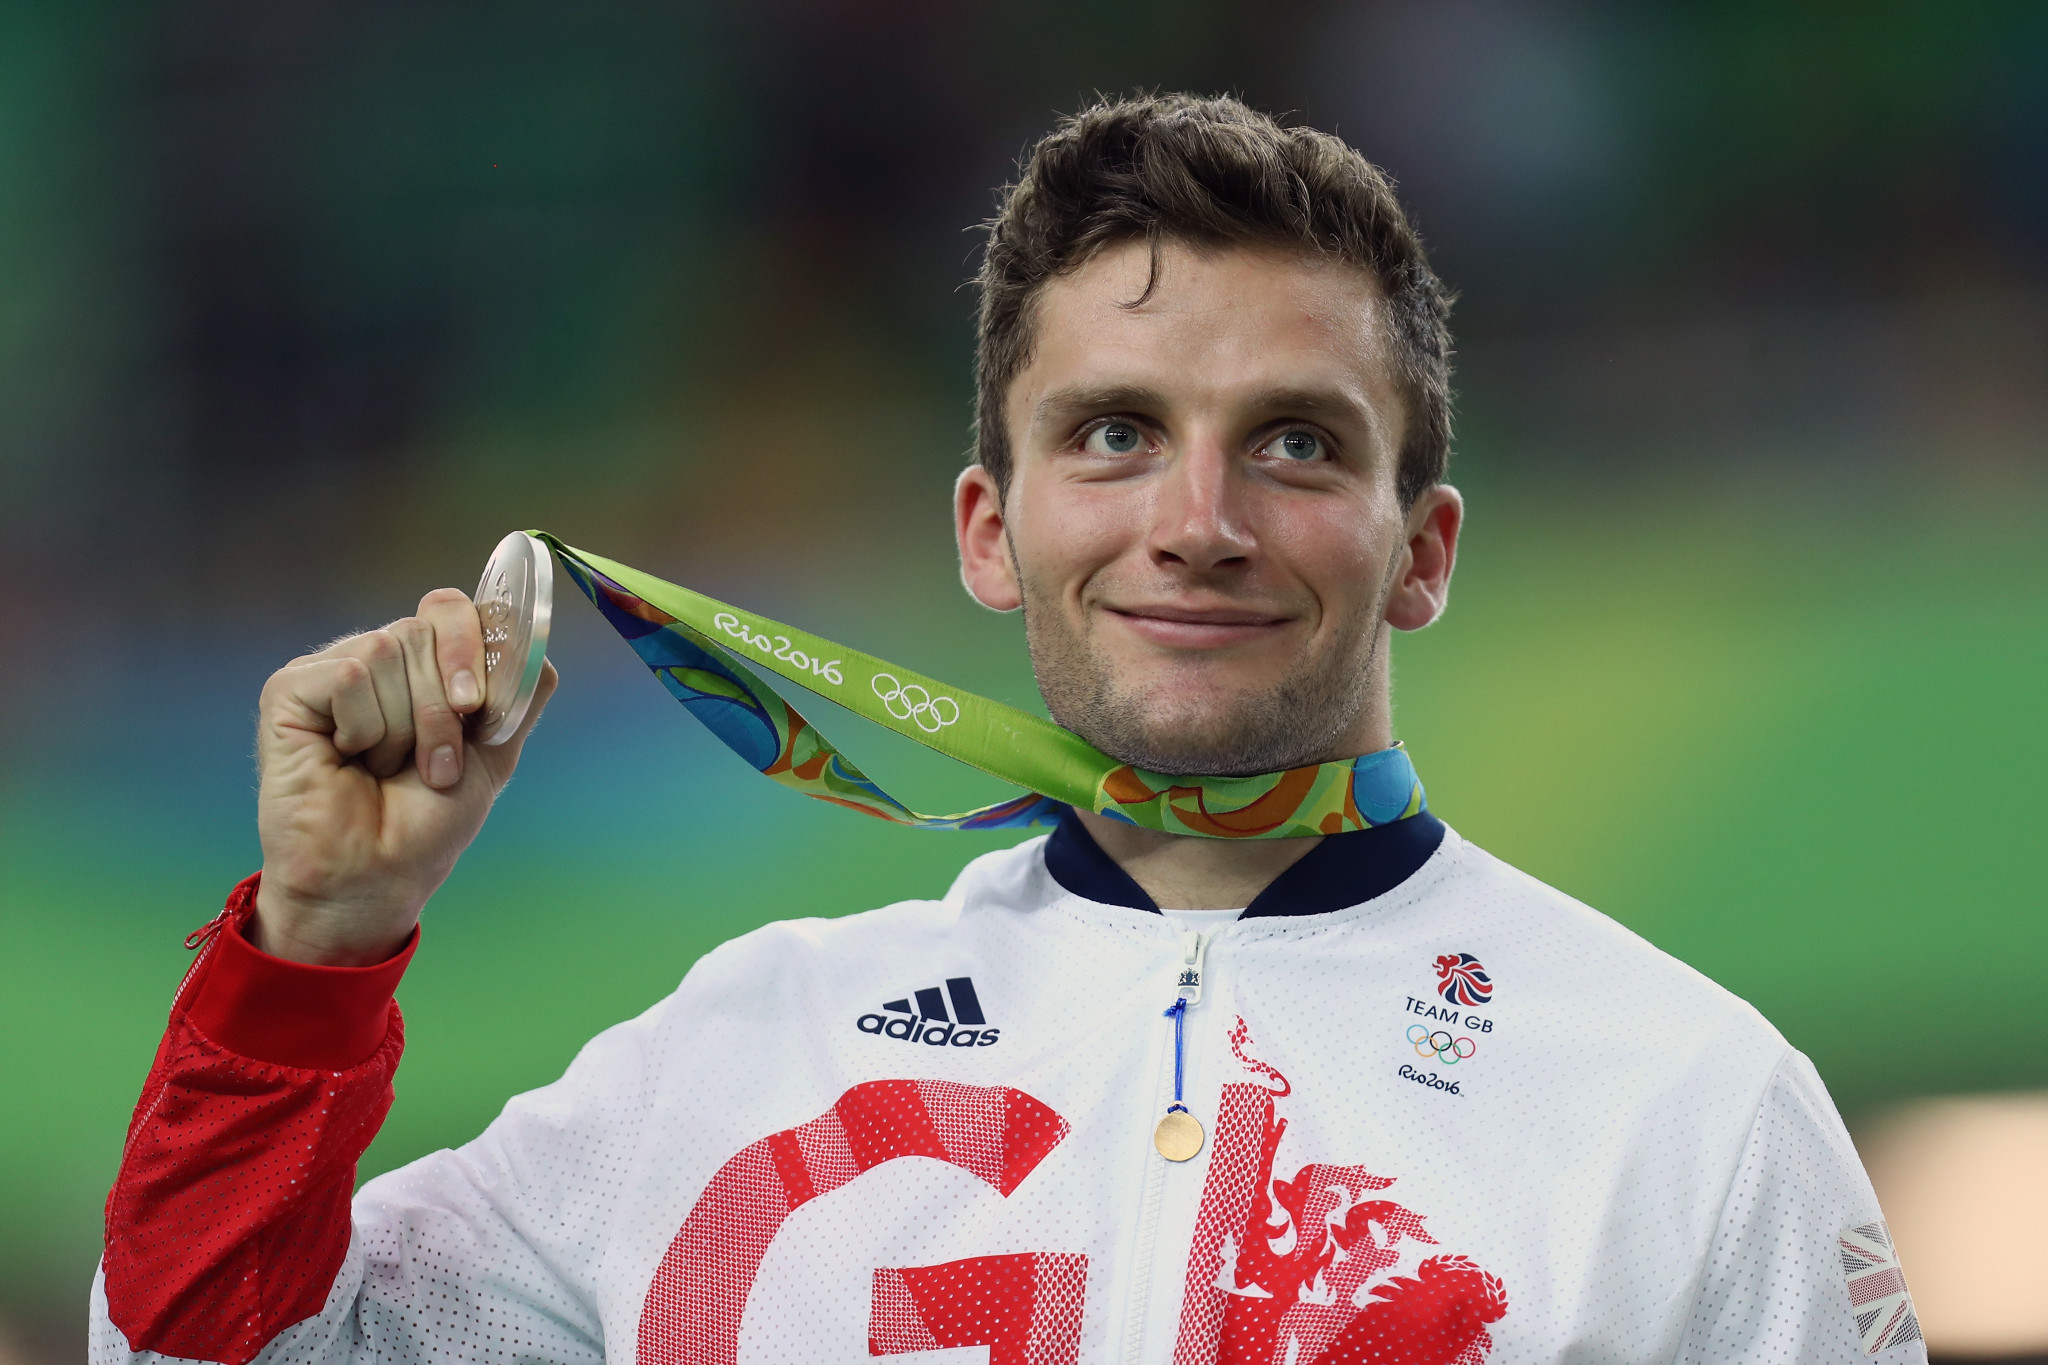 Rio 2016 Olympic gold medallist Callum Skinner has been critical about British Cycling's inattention to mental health and wellbeing ©Getty Images